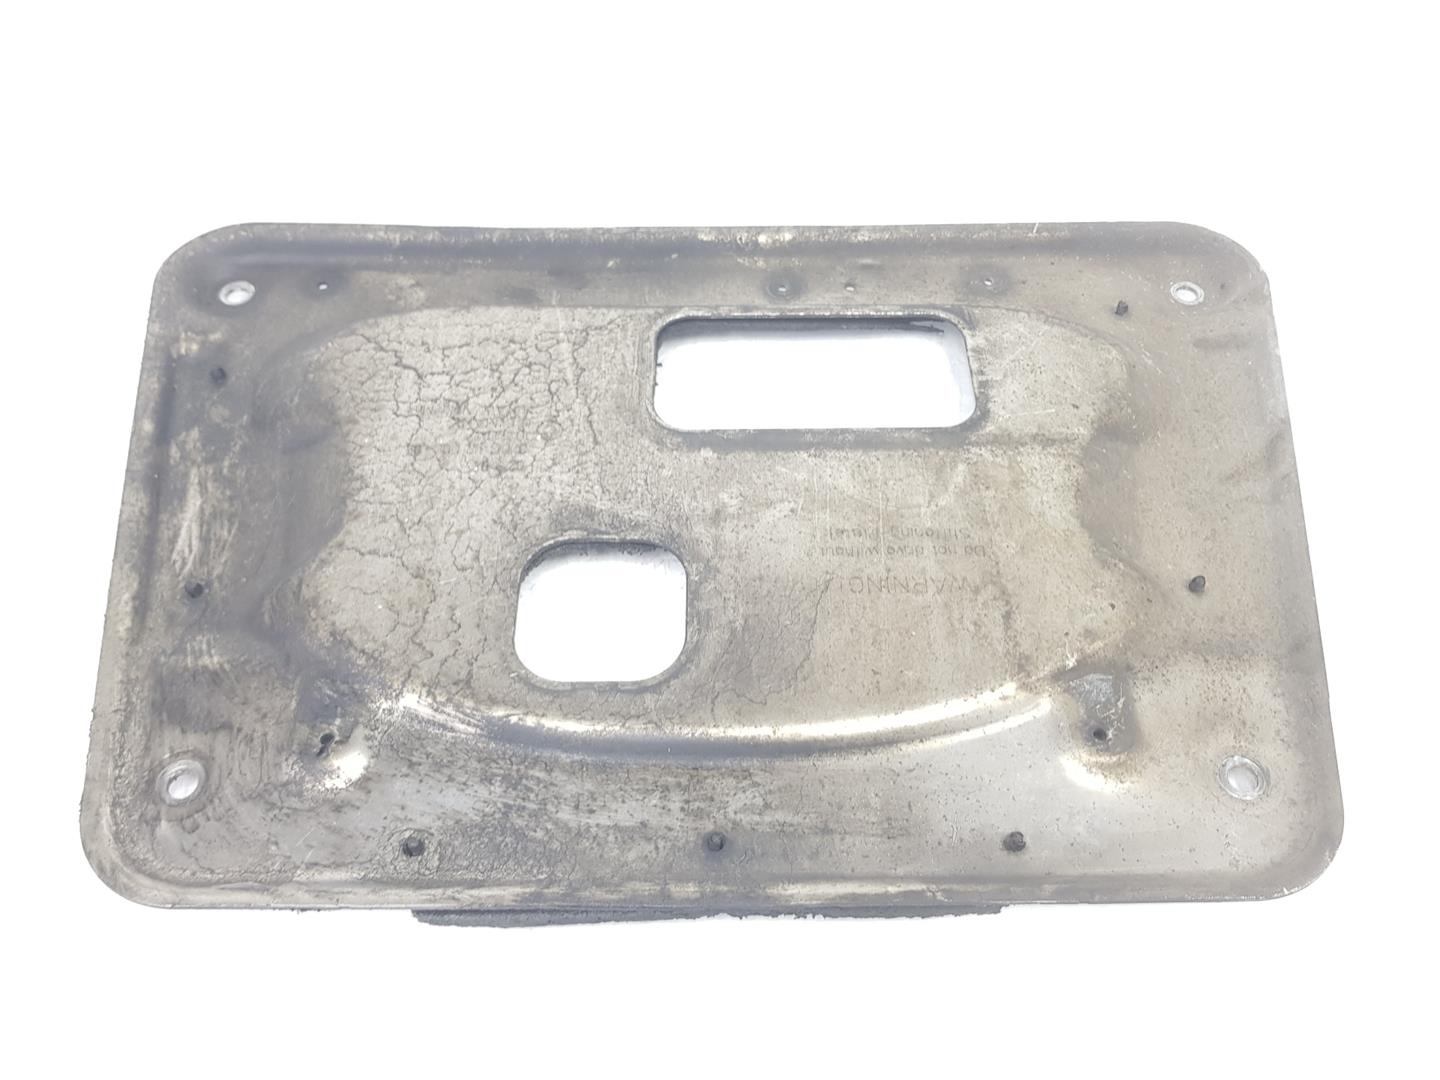 BMW X3 E83 (2003-2010) Front Engine Cover 31103412099, 3412099 24221902